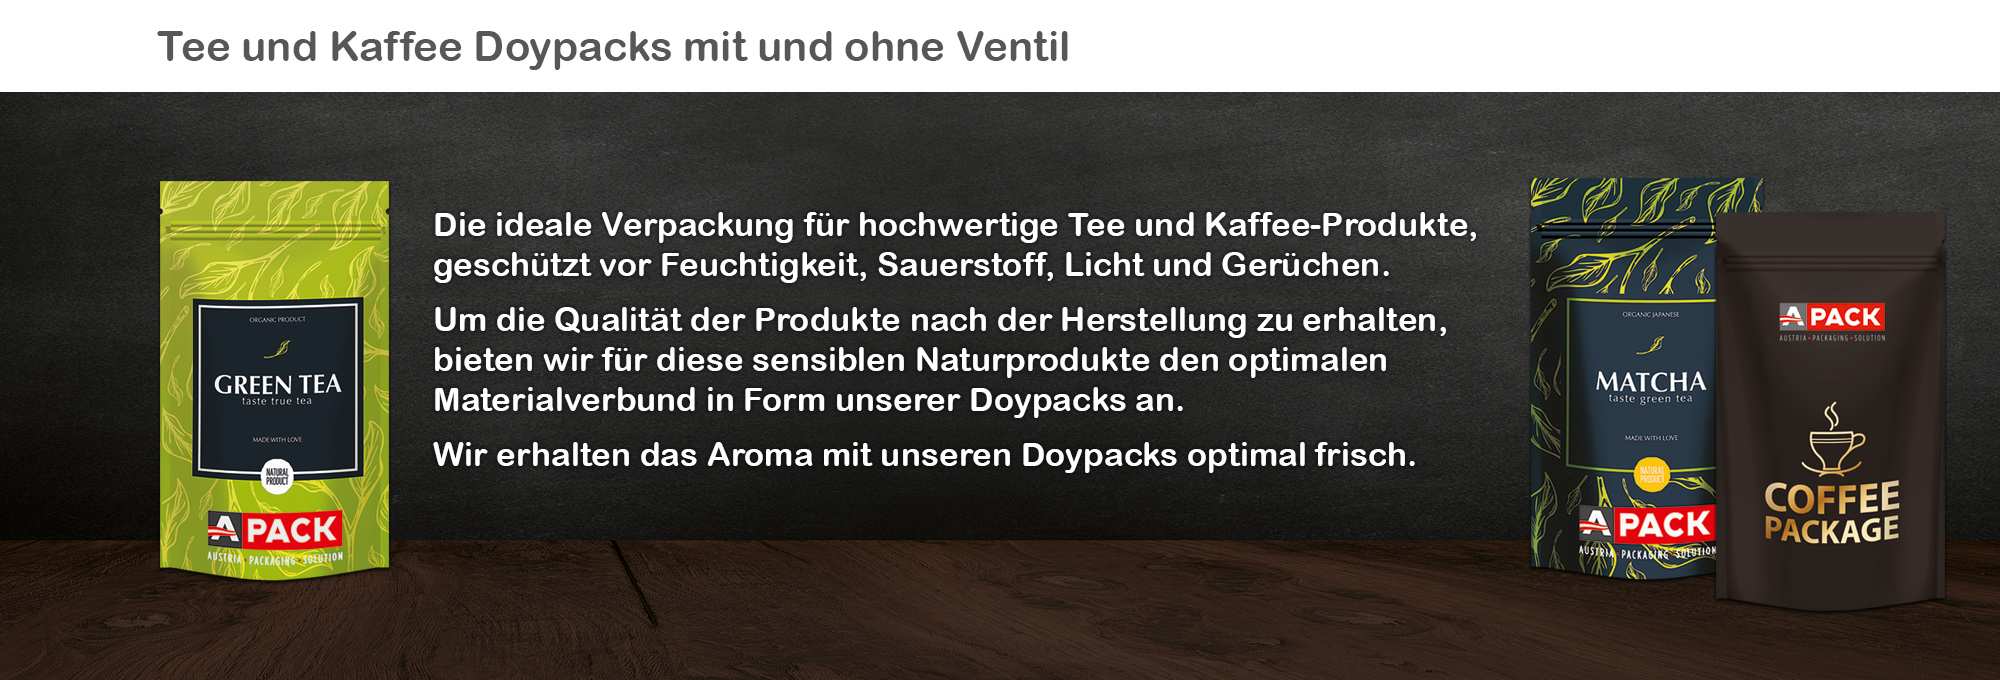 Austria Packaging Solution Doypacks Tee&Cafe